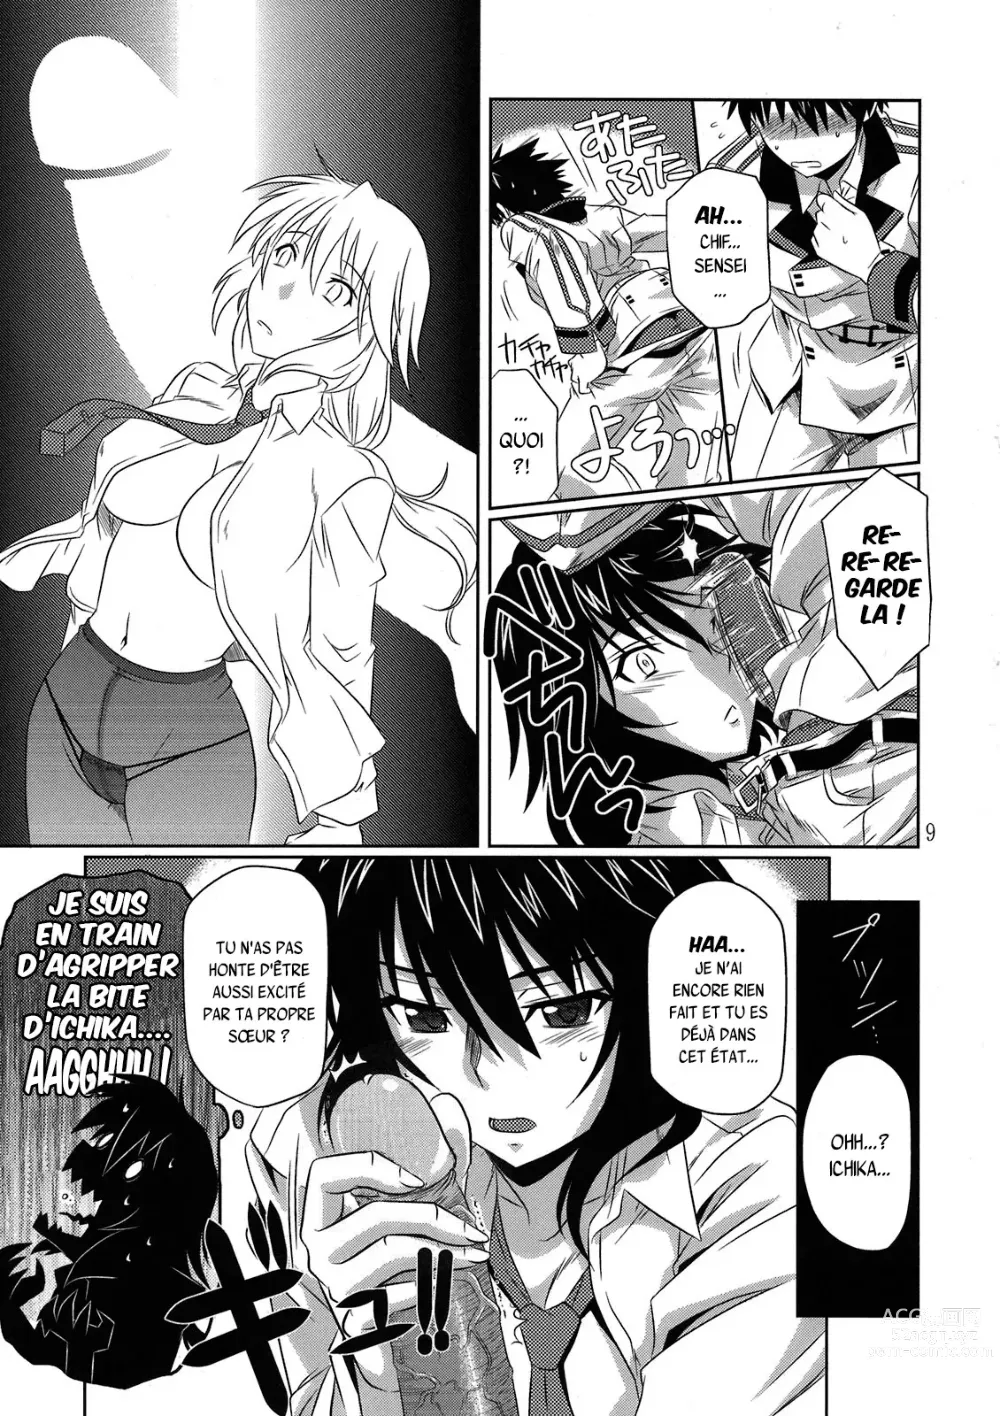 Page 9 of doujinshi is Incest Strategy (decensored)